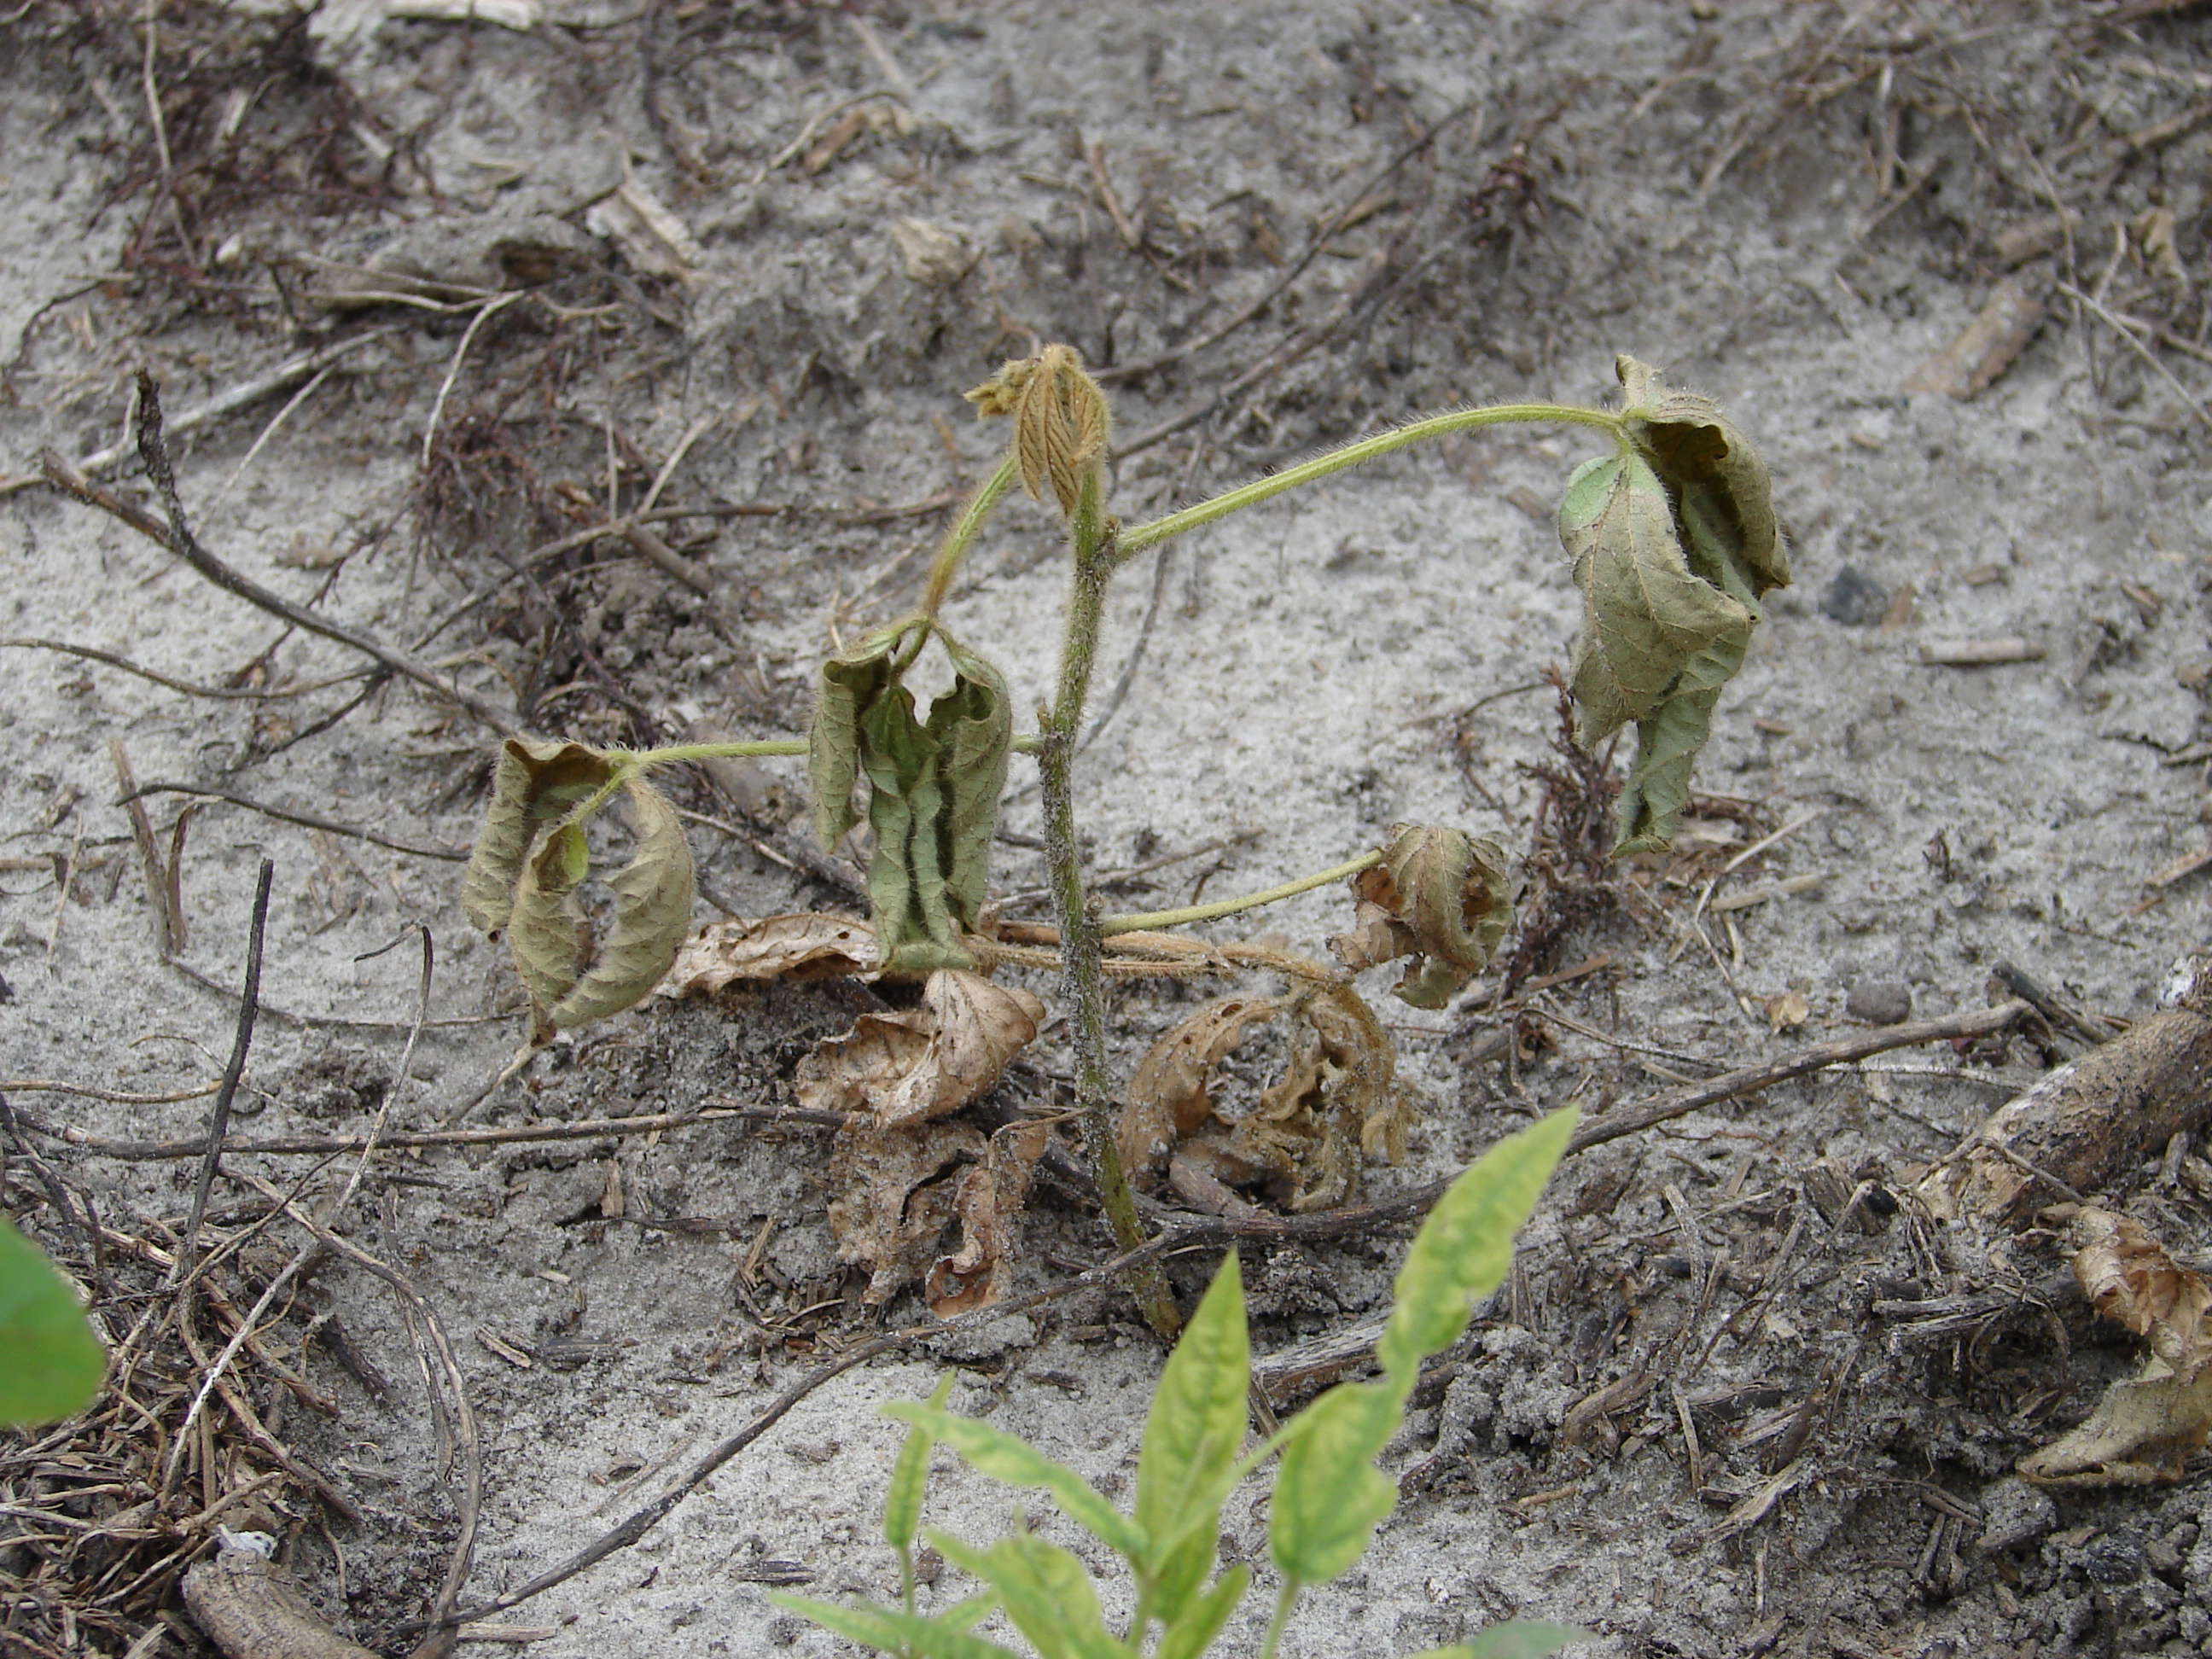 Rhizoctonia seedling blight and root rot symptoms include pre- and post-emergence damping off.